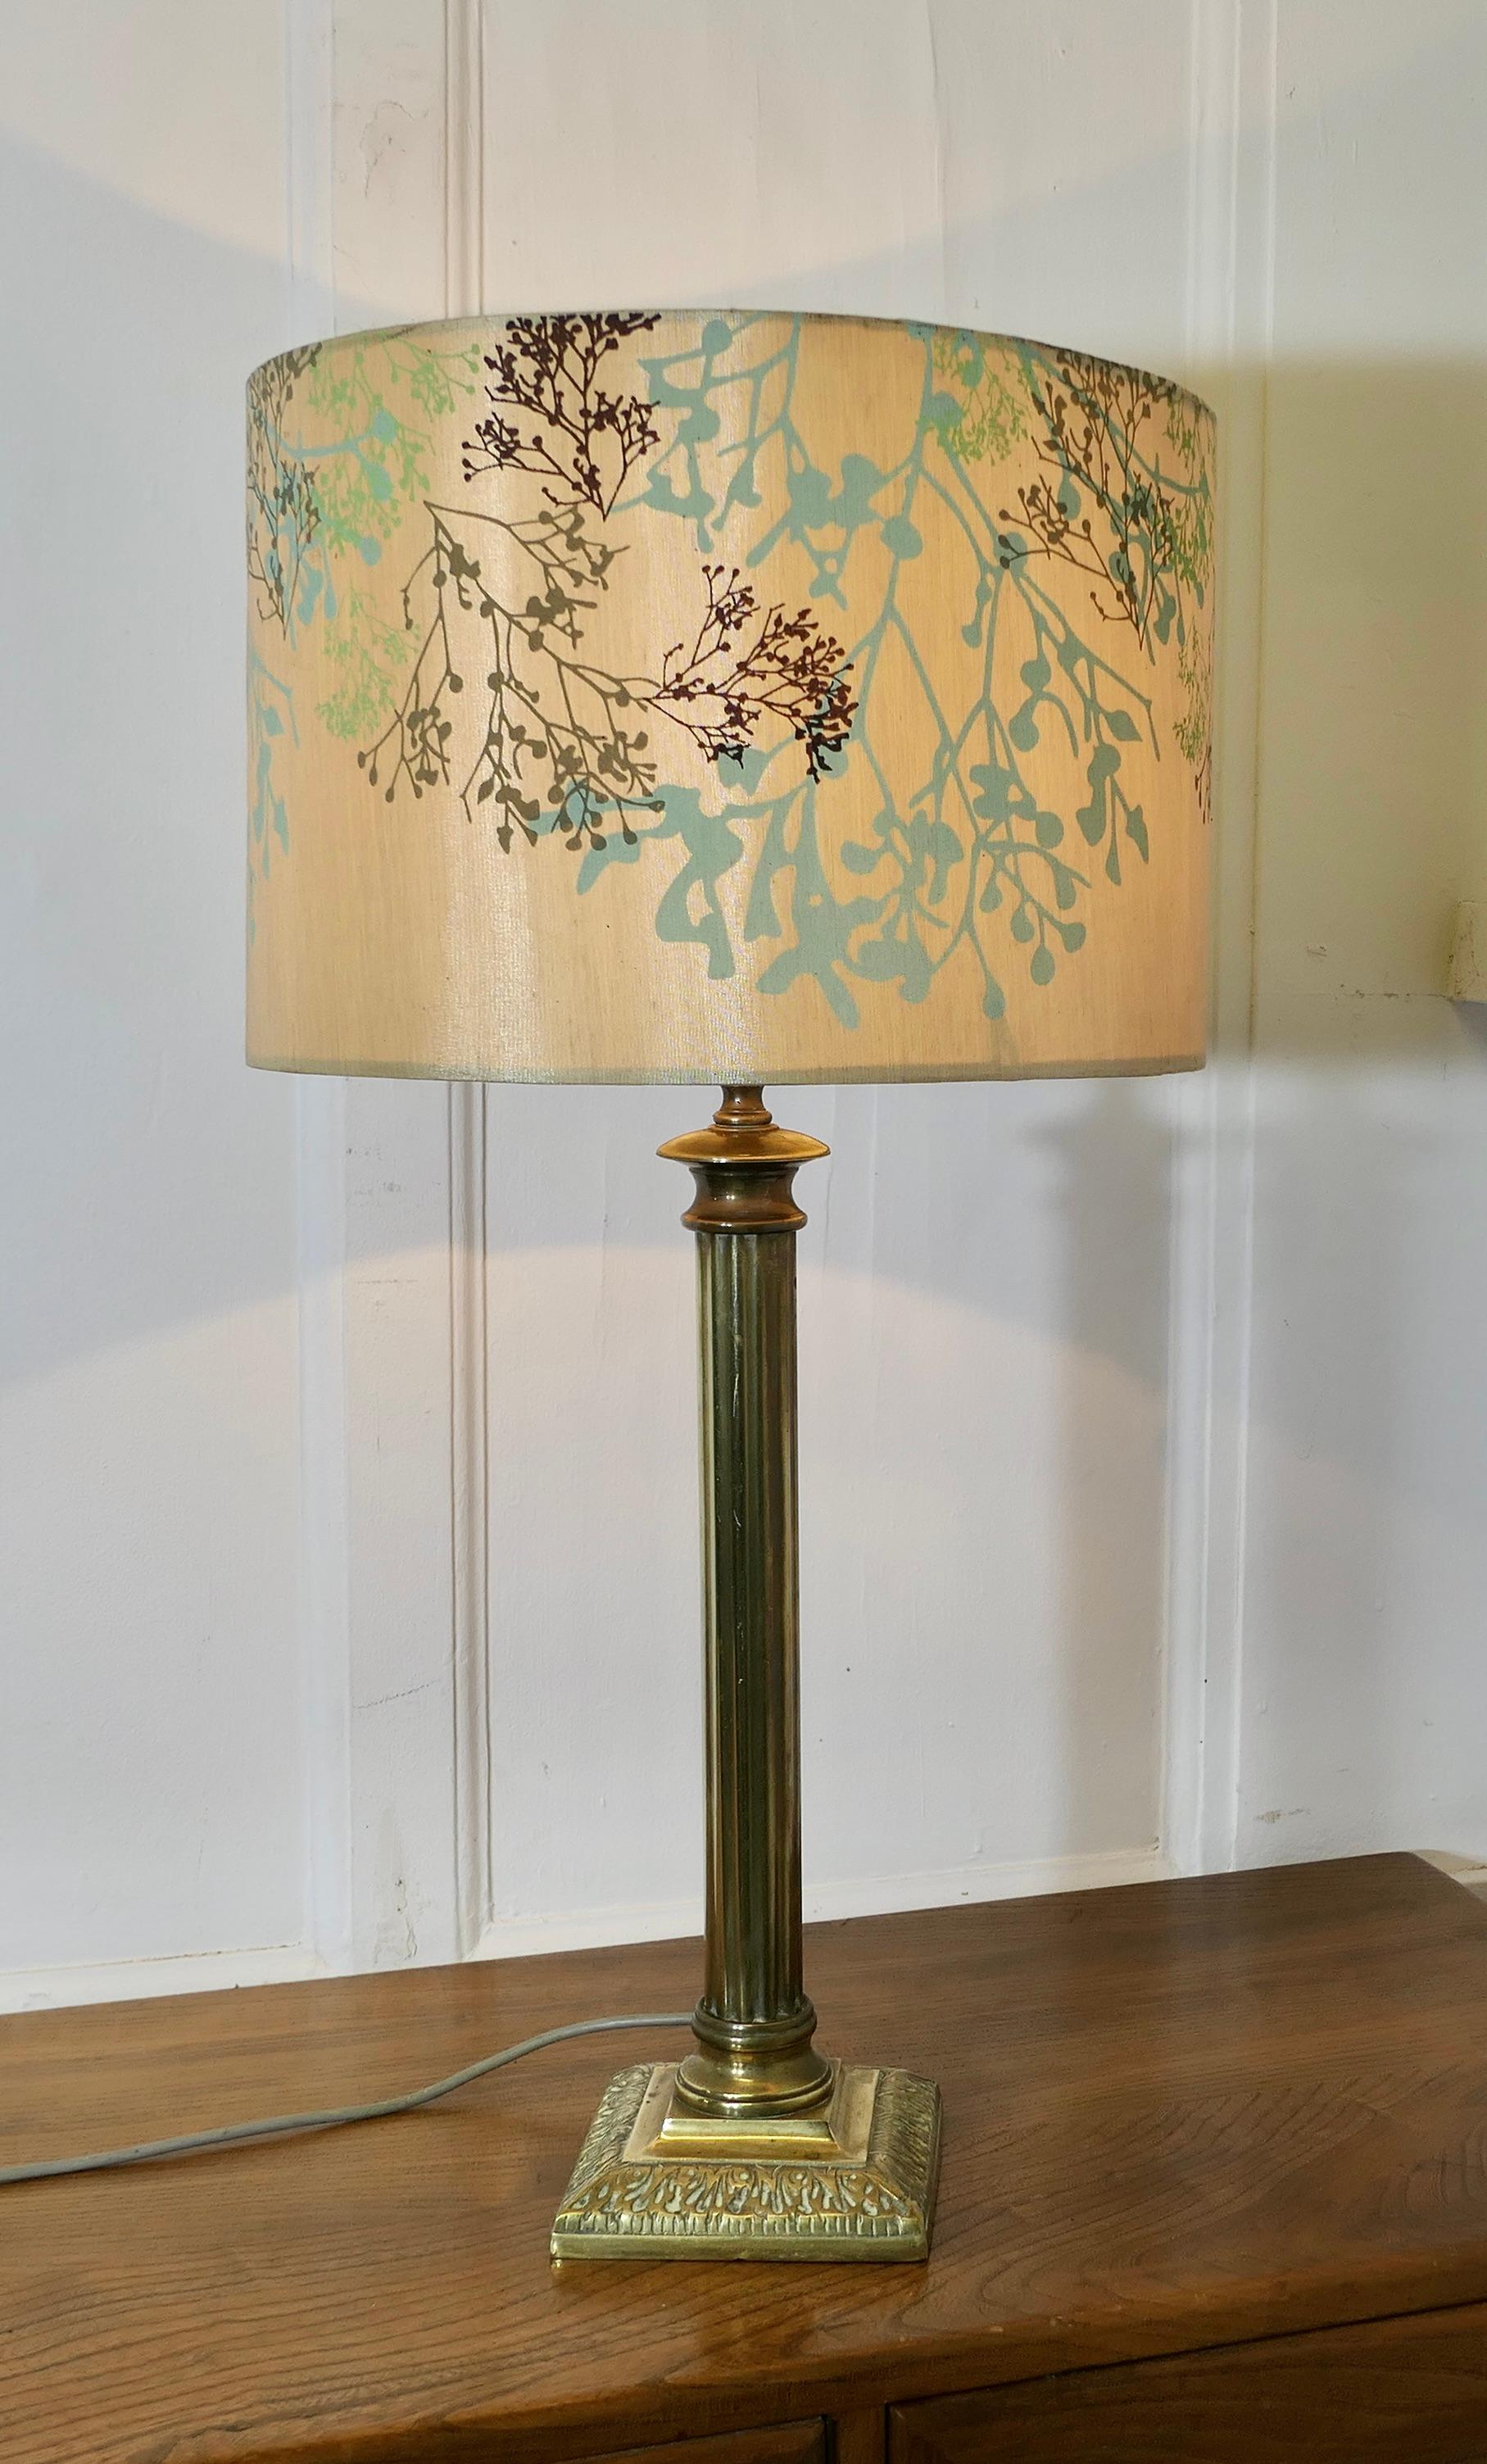 A Tall Brass Corinthian Column Table Lamp with Shade

This is a very attractive lamp it has a heavy single corinthian style column set on a stepped rectangular base, it comes with a neutral coloured linen lamp shade, this can be included if